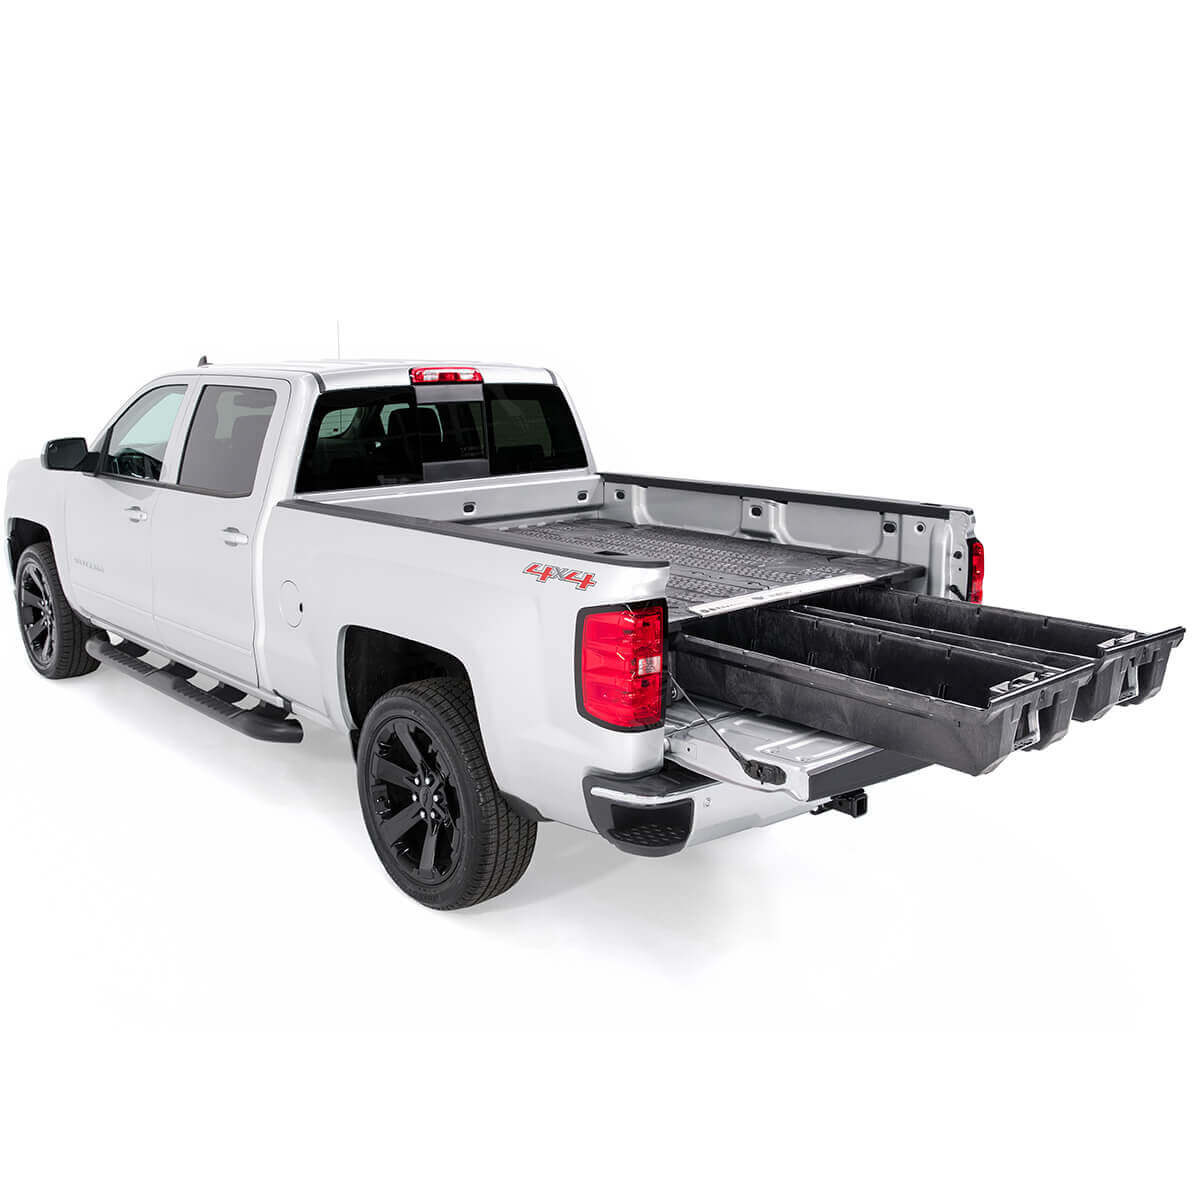 Decked 5ft. 9in. Bed Length Storage System for Sierra or Silverado 1500 (2019+) - New wide bed width